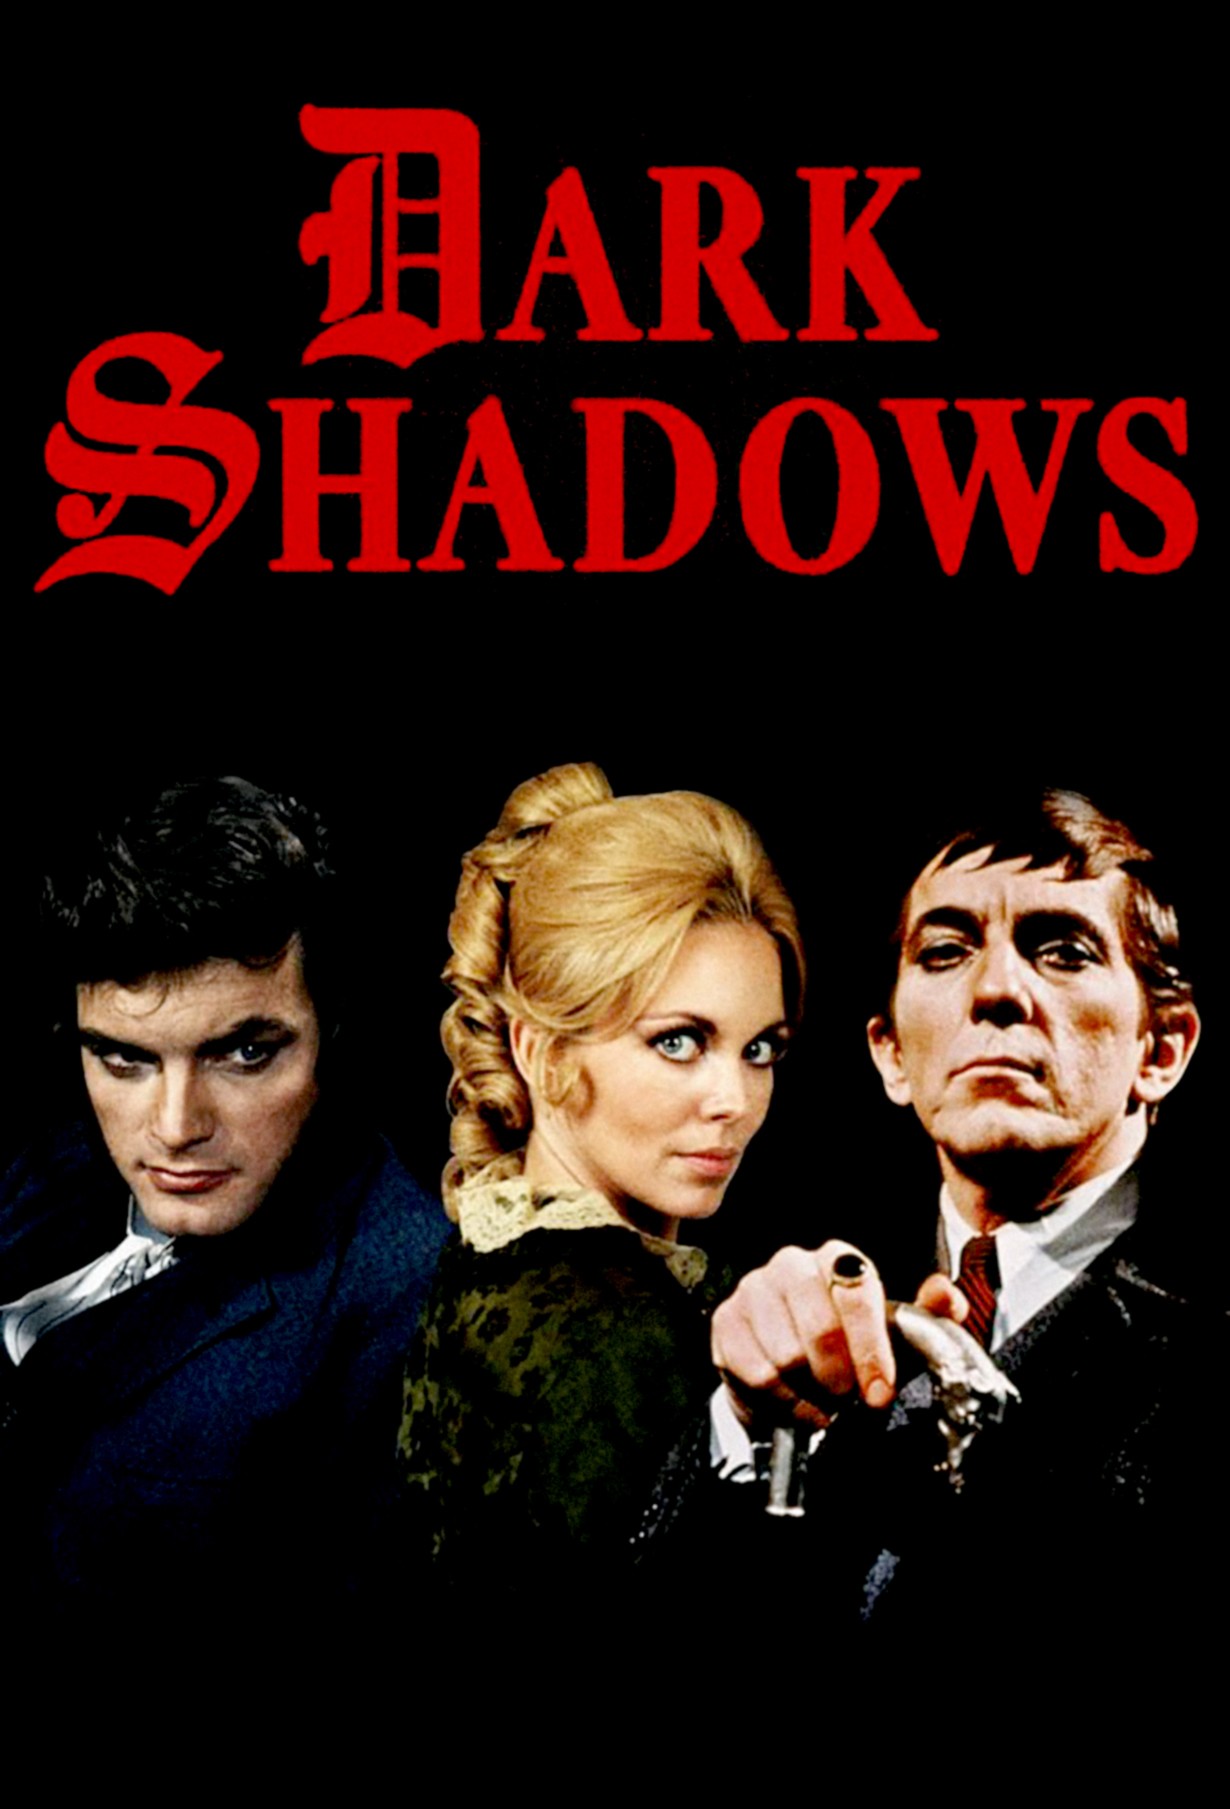 A "Dark Shadows" poster from 1966 | Source: Getty Images